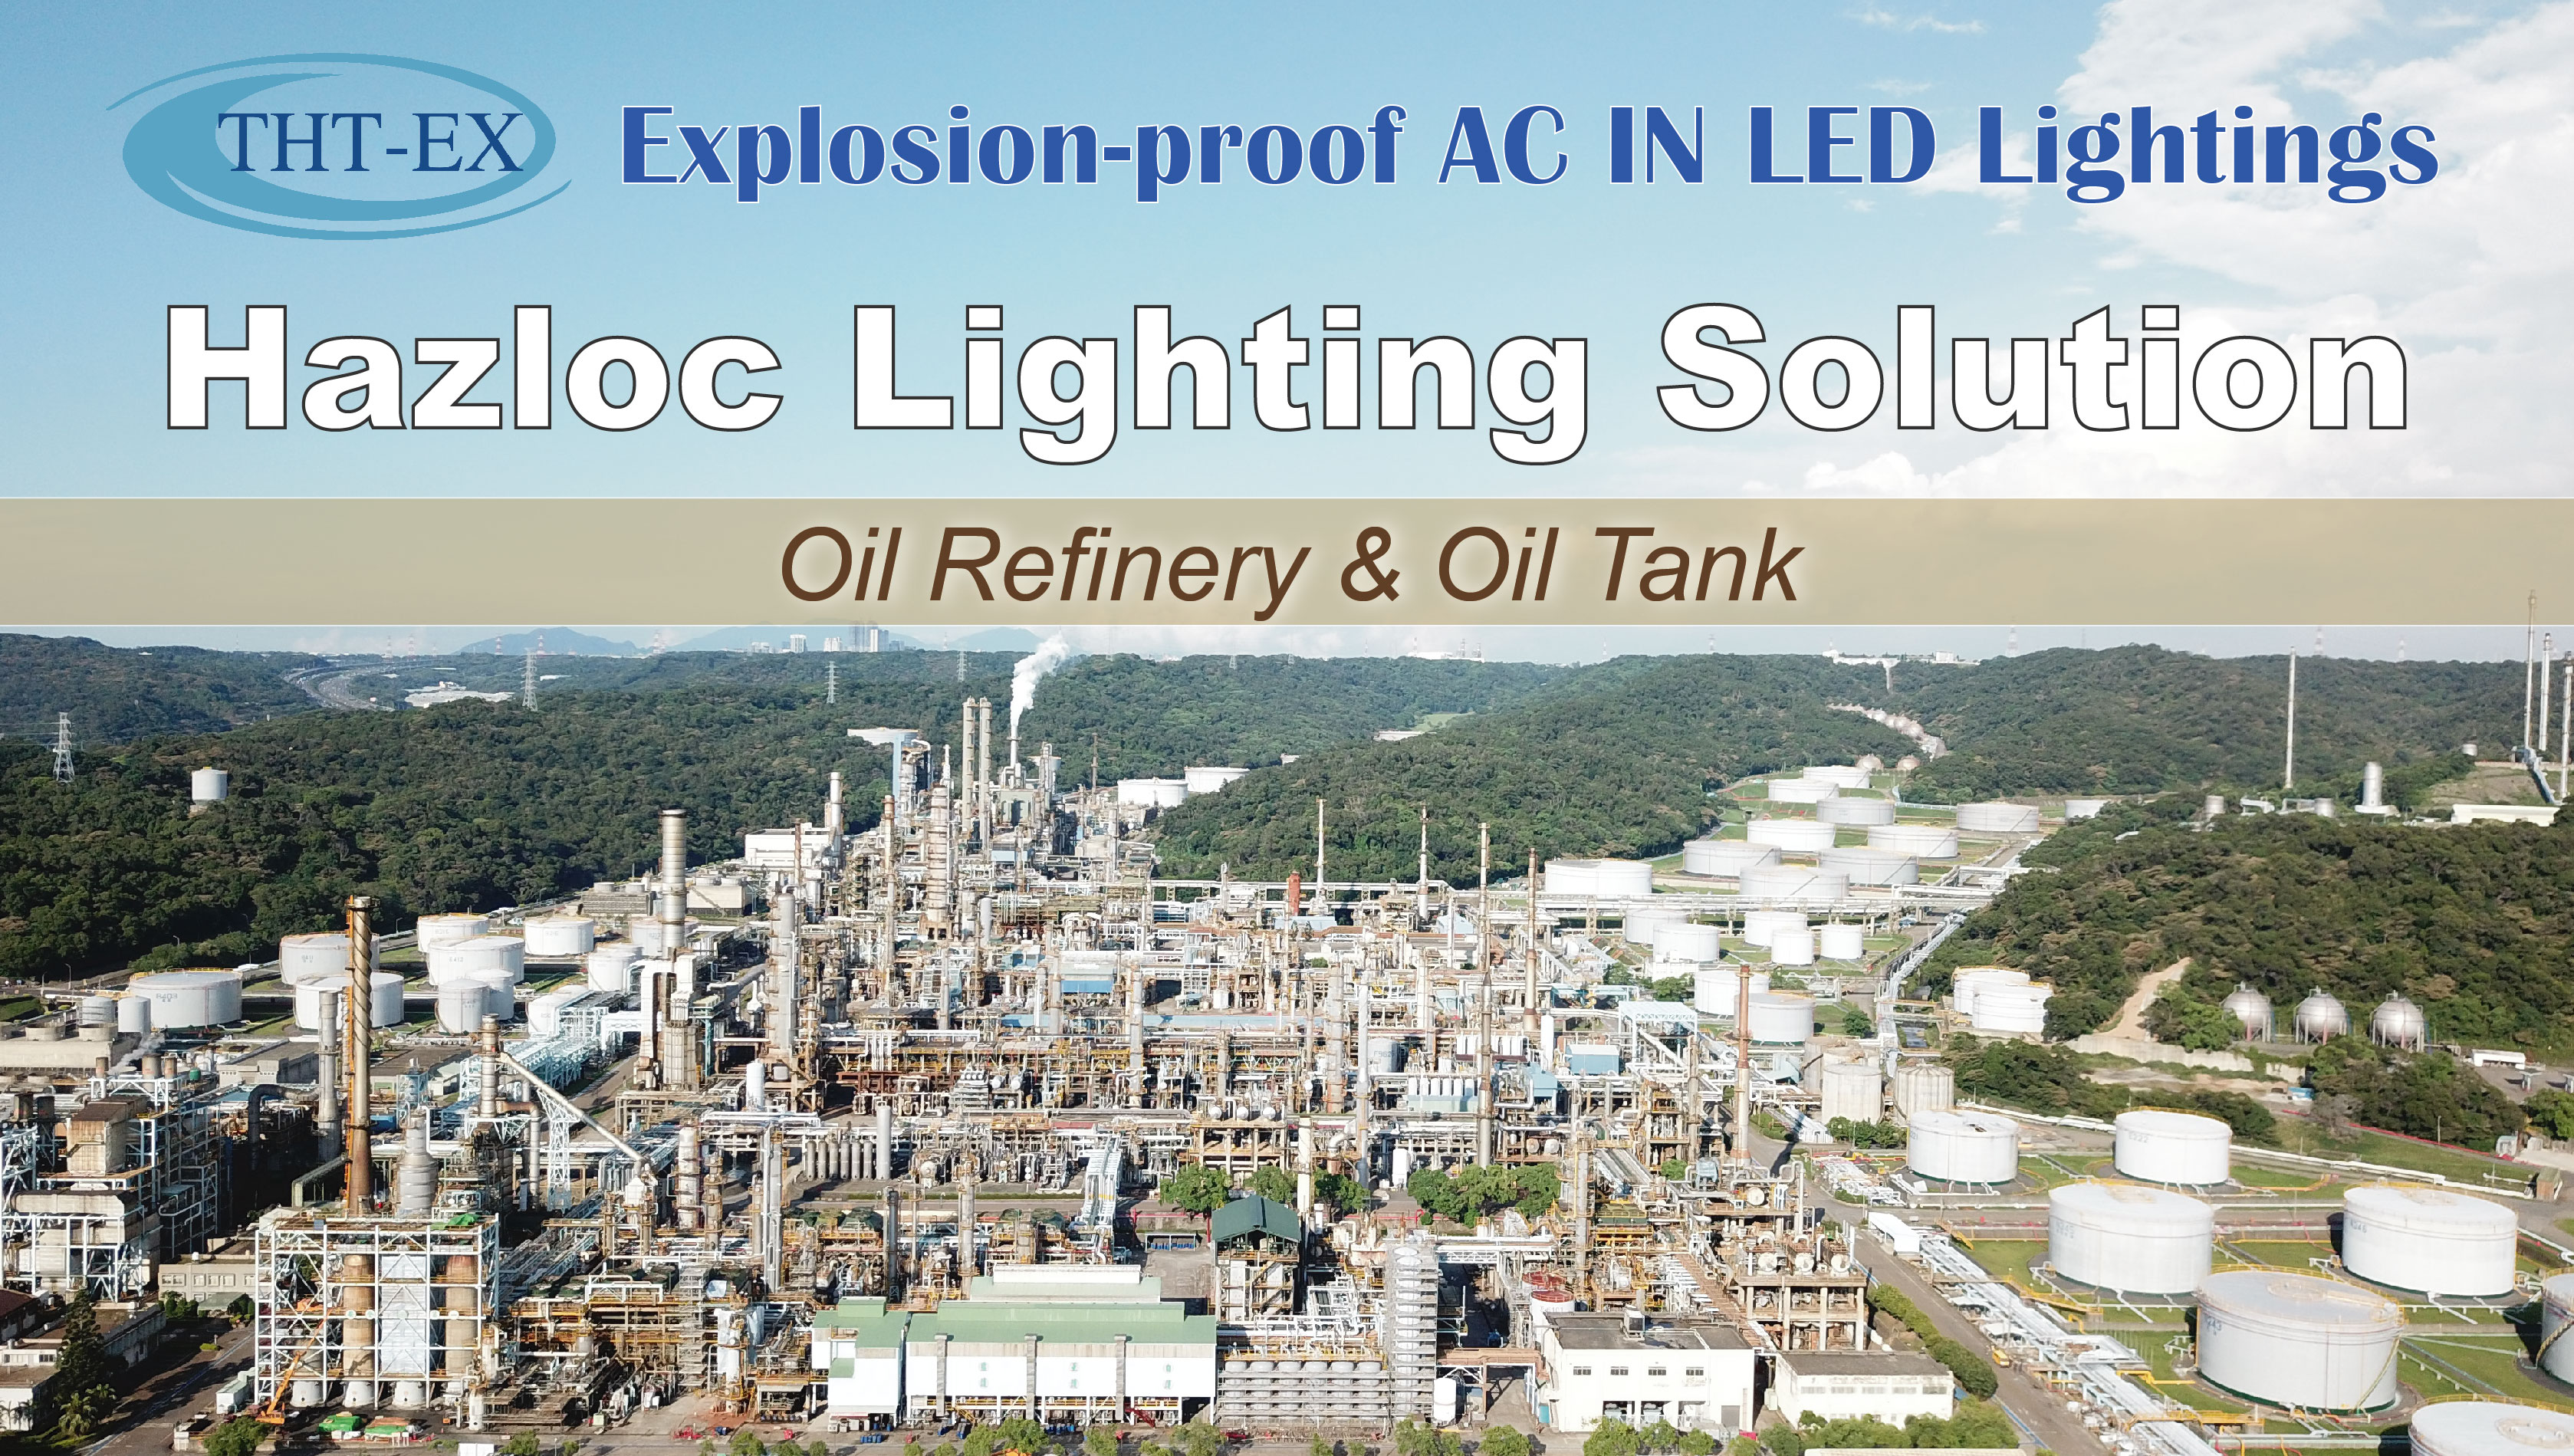 Hazloc Lighting Solution for Oil Refinery and Oil Tank